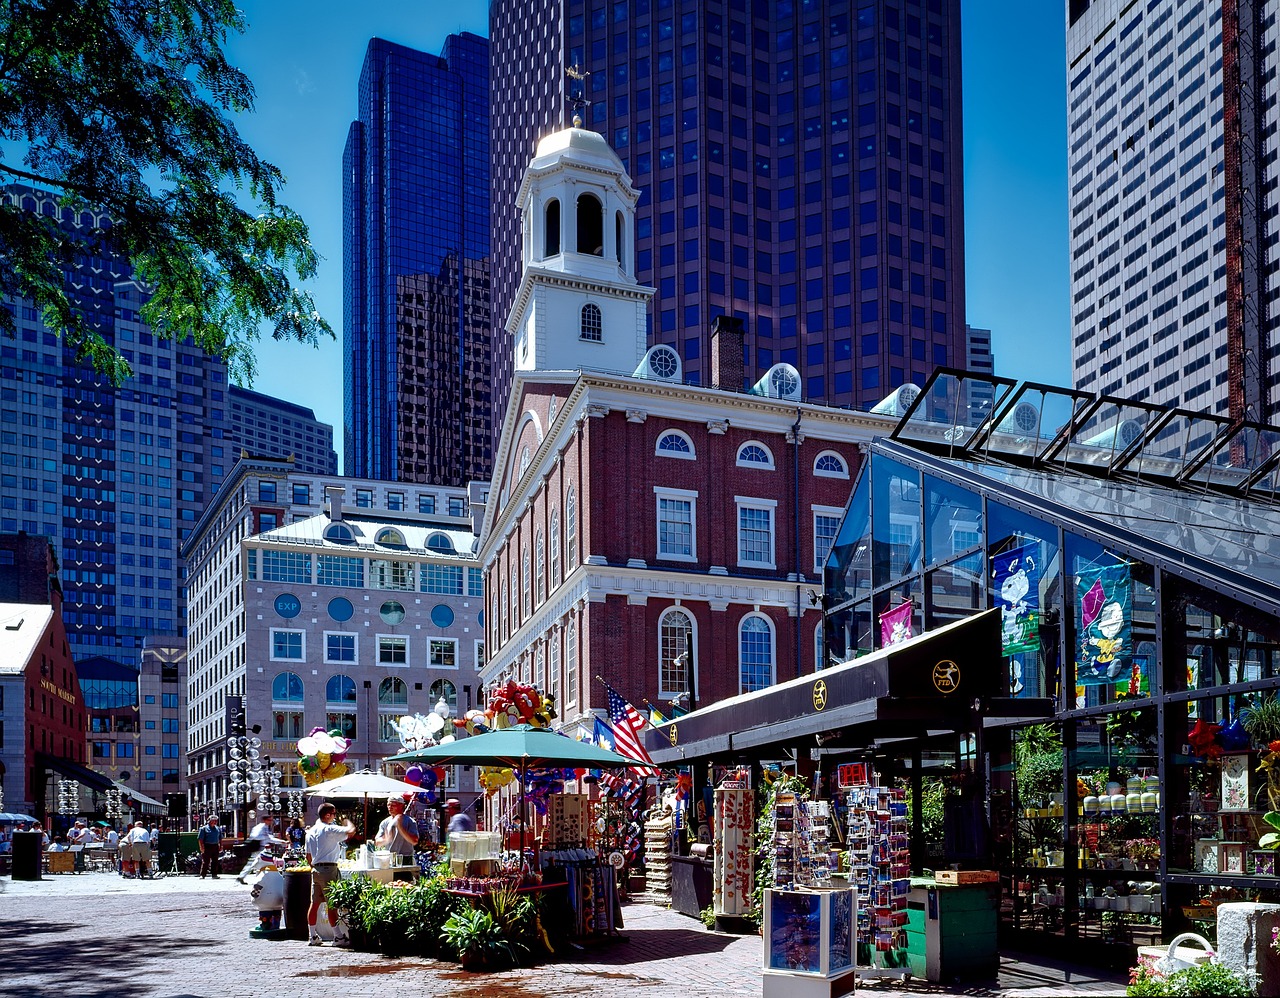 Historical Boston and Haunted Salem: 5-Day New England Adventure